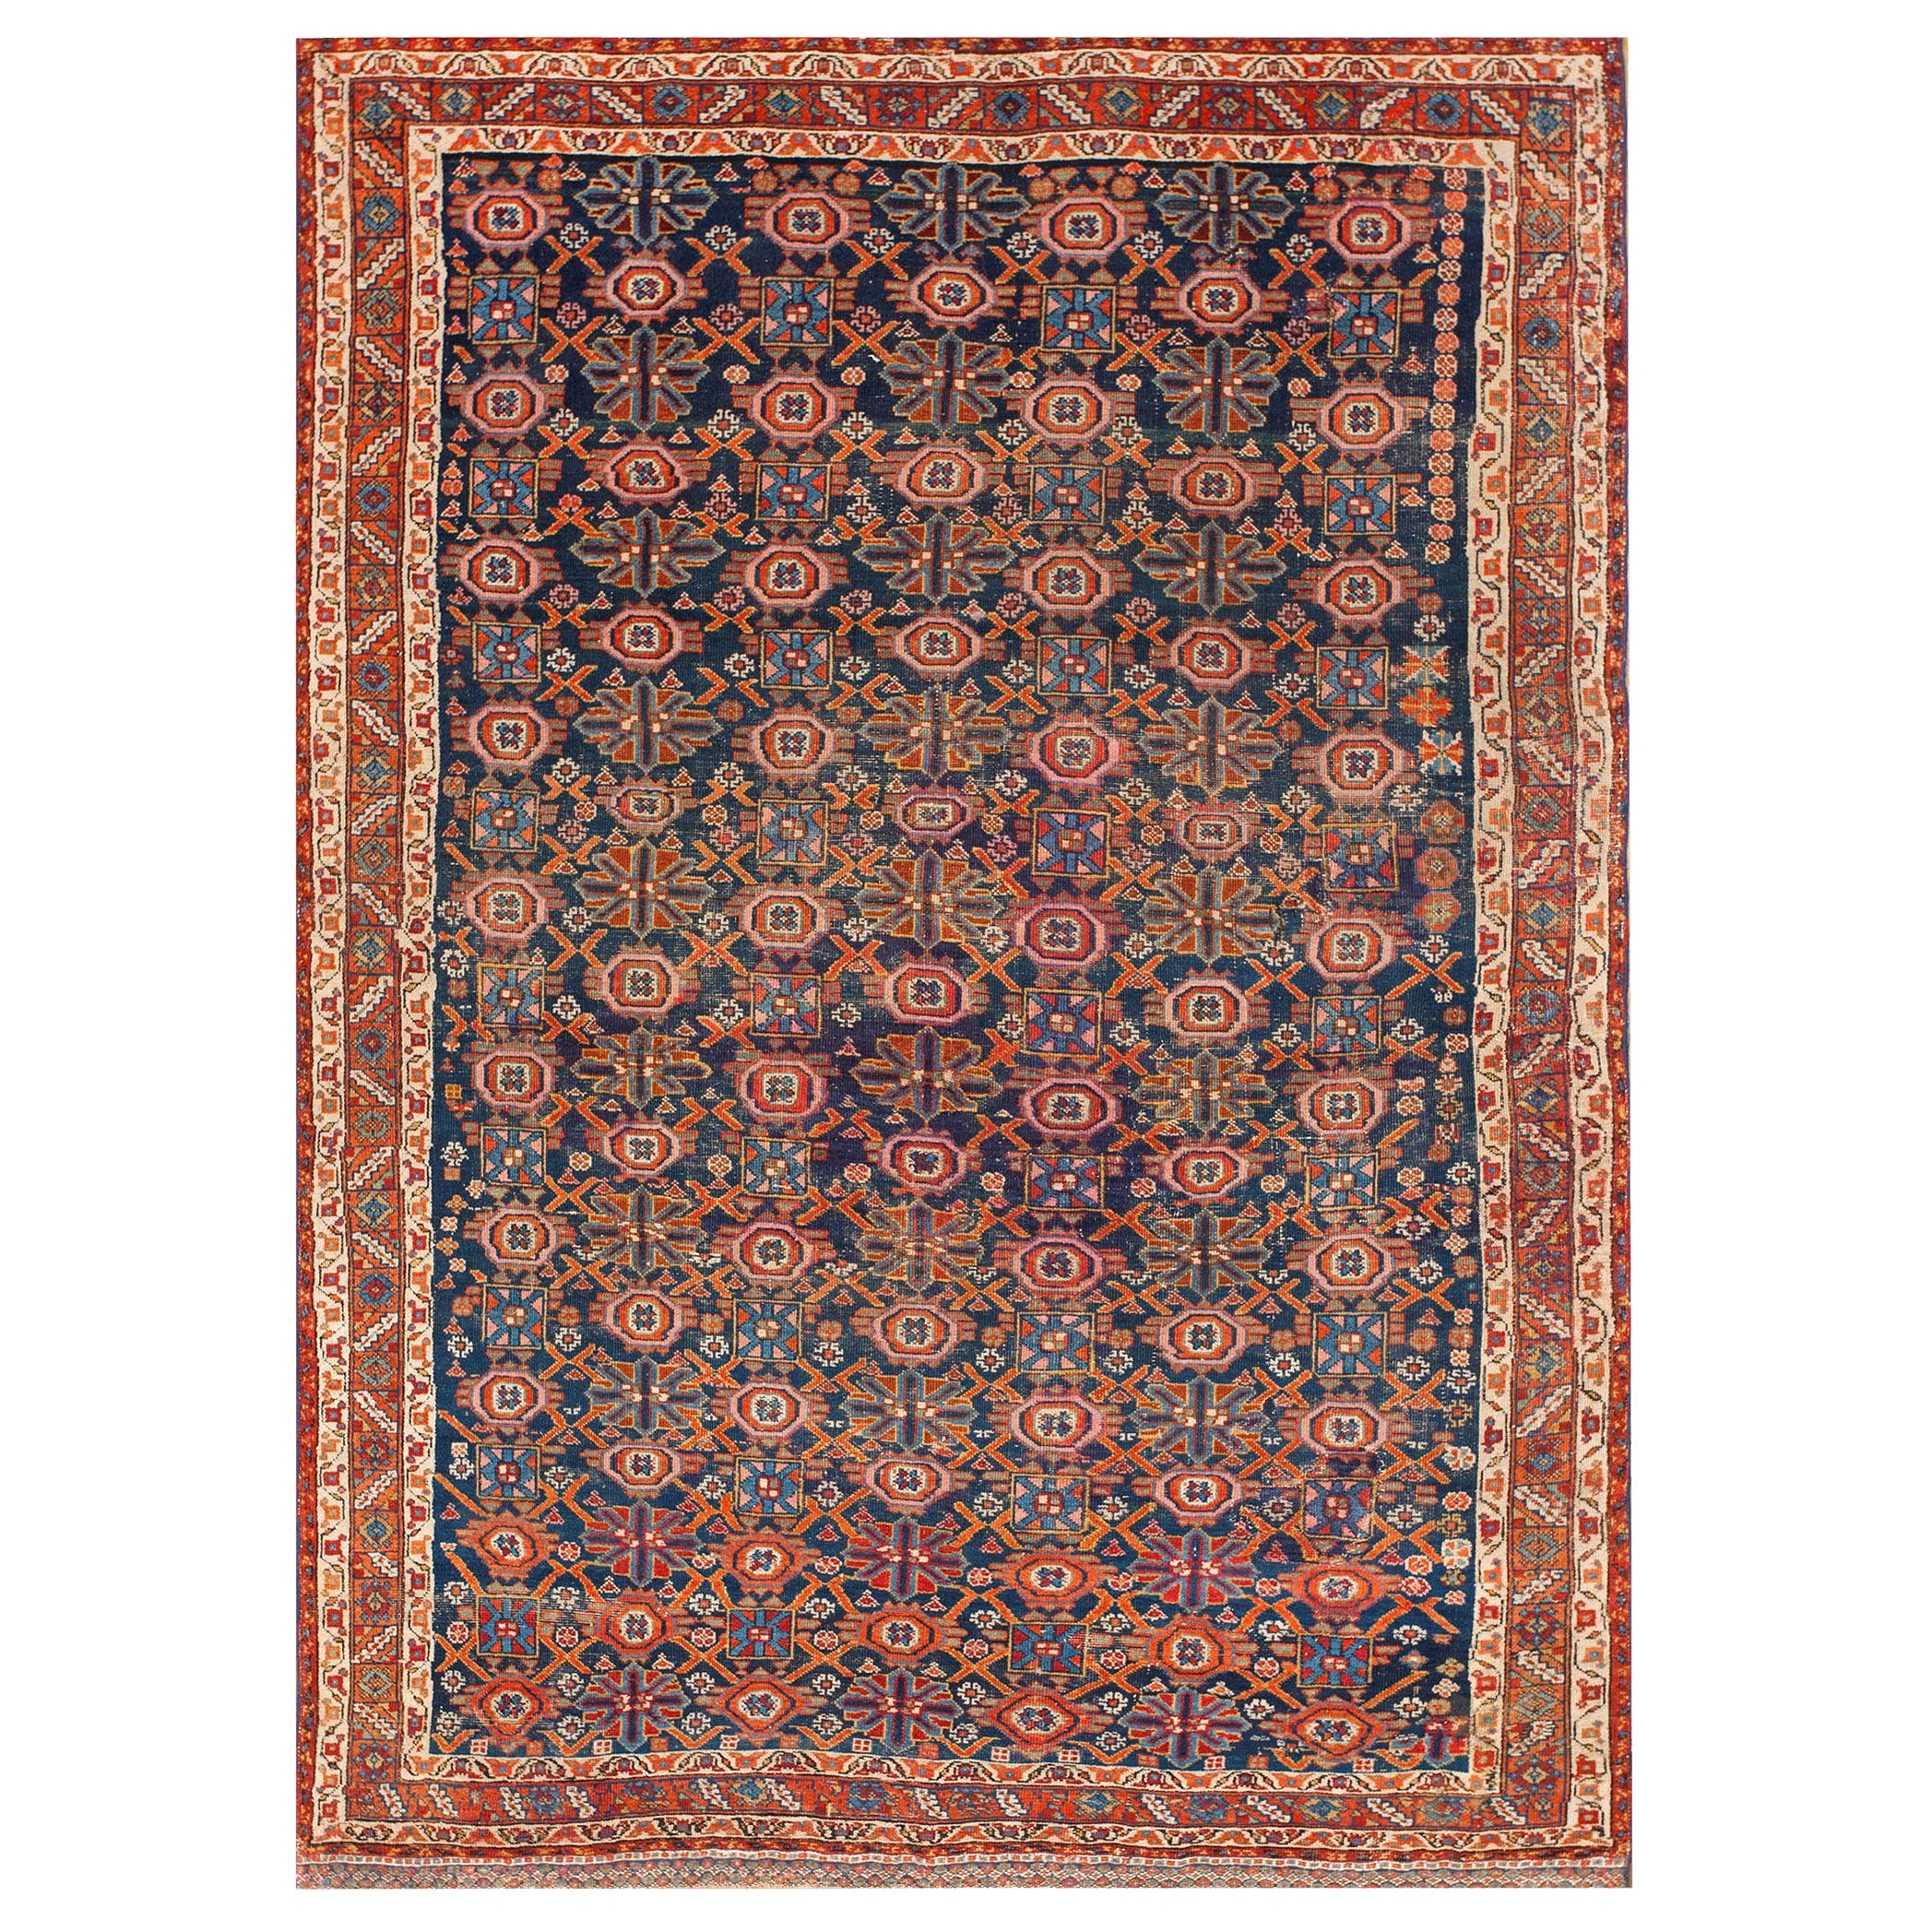 Late 19th Century S.E. Persian Afshar Carpet ( 4'6" x 6' - 137 x 183 ) For Sale